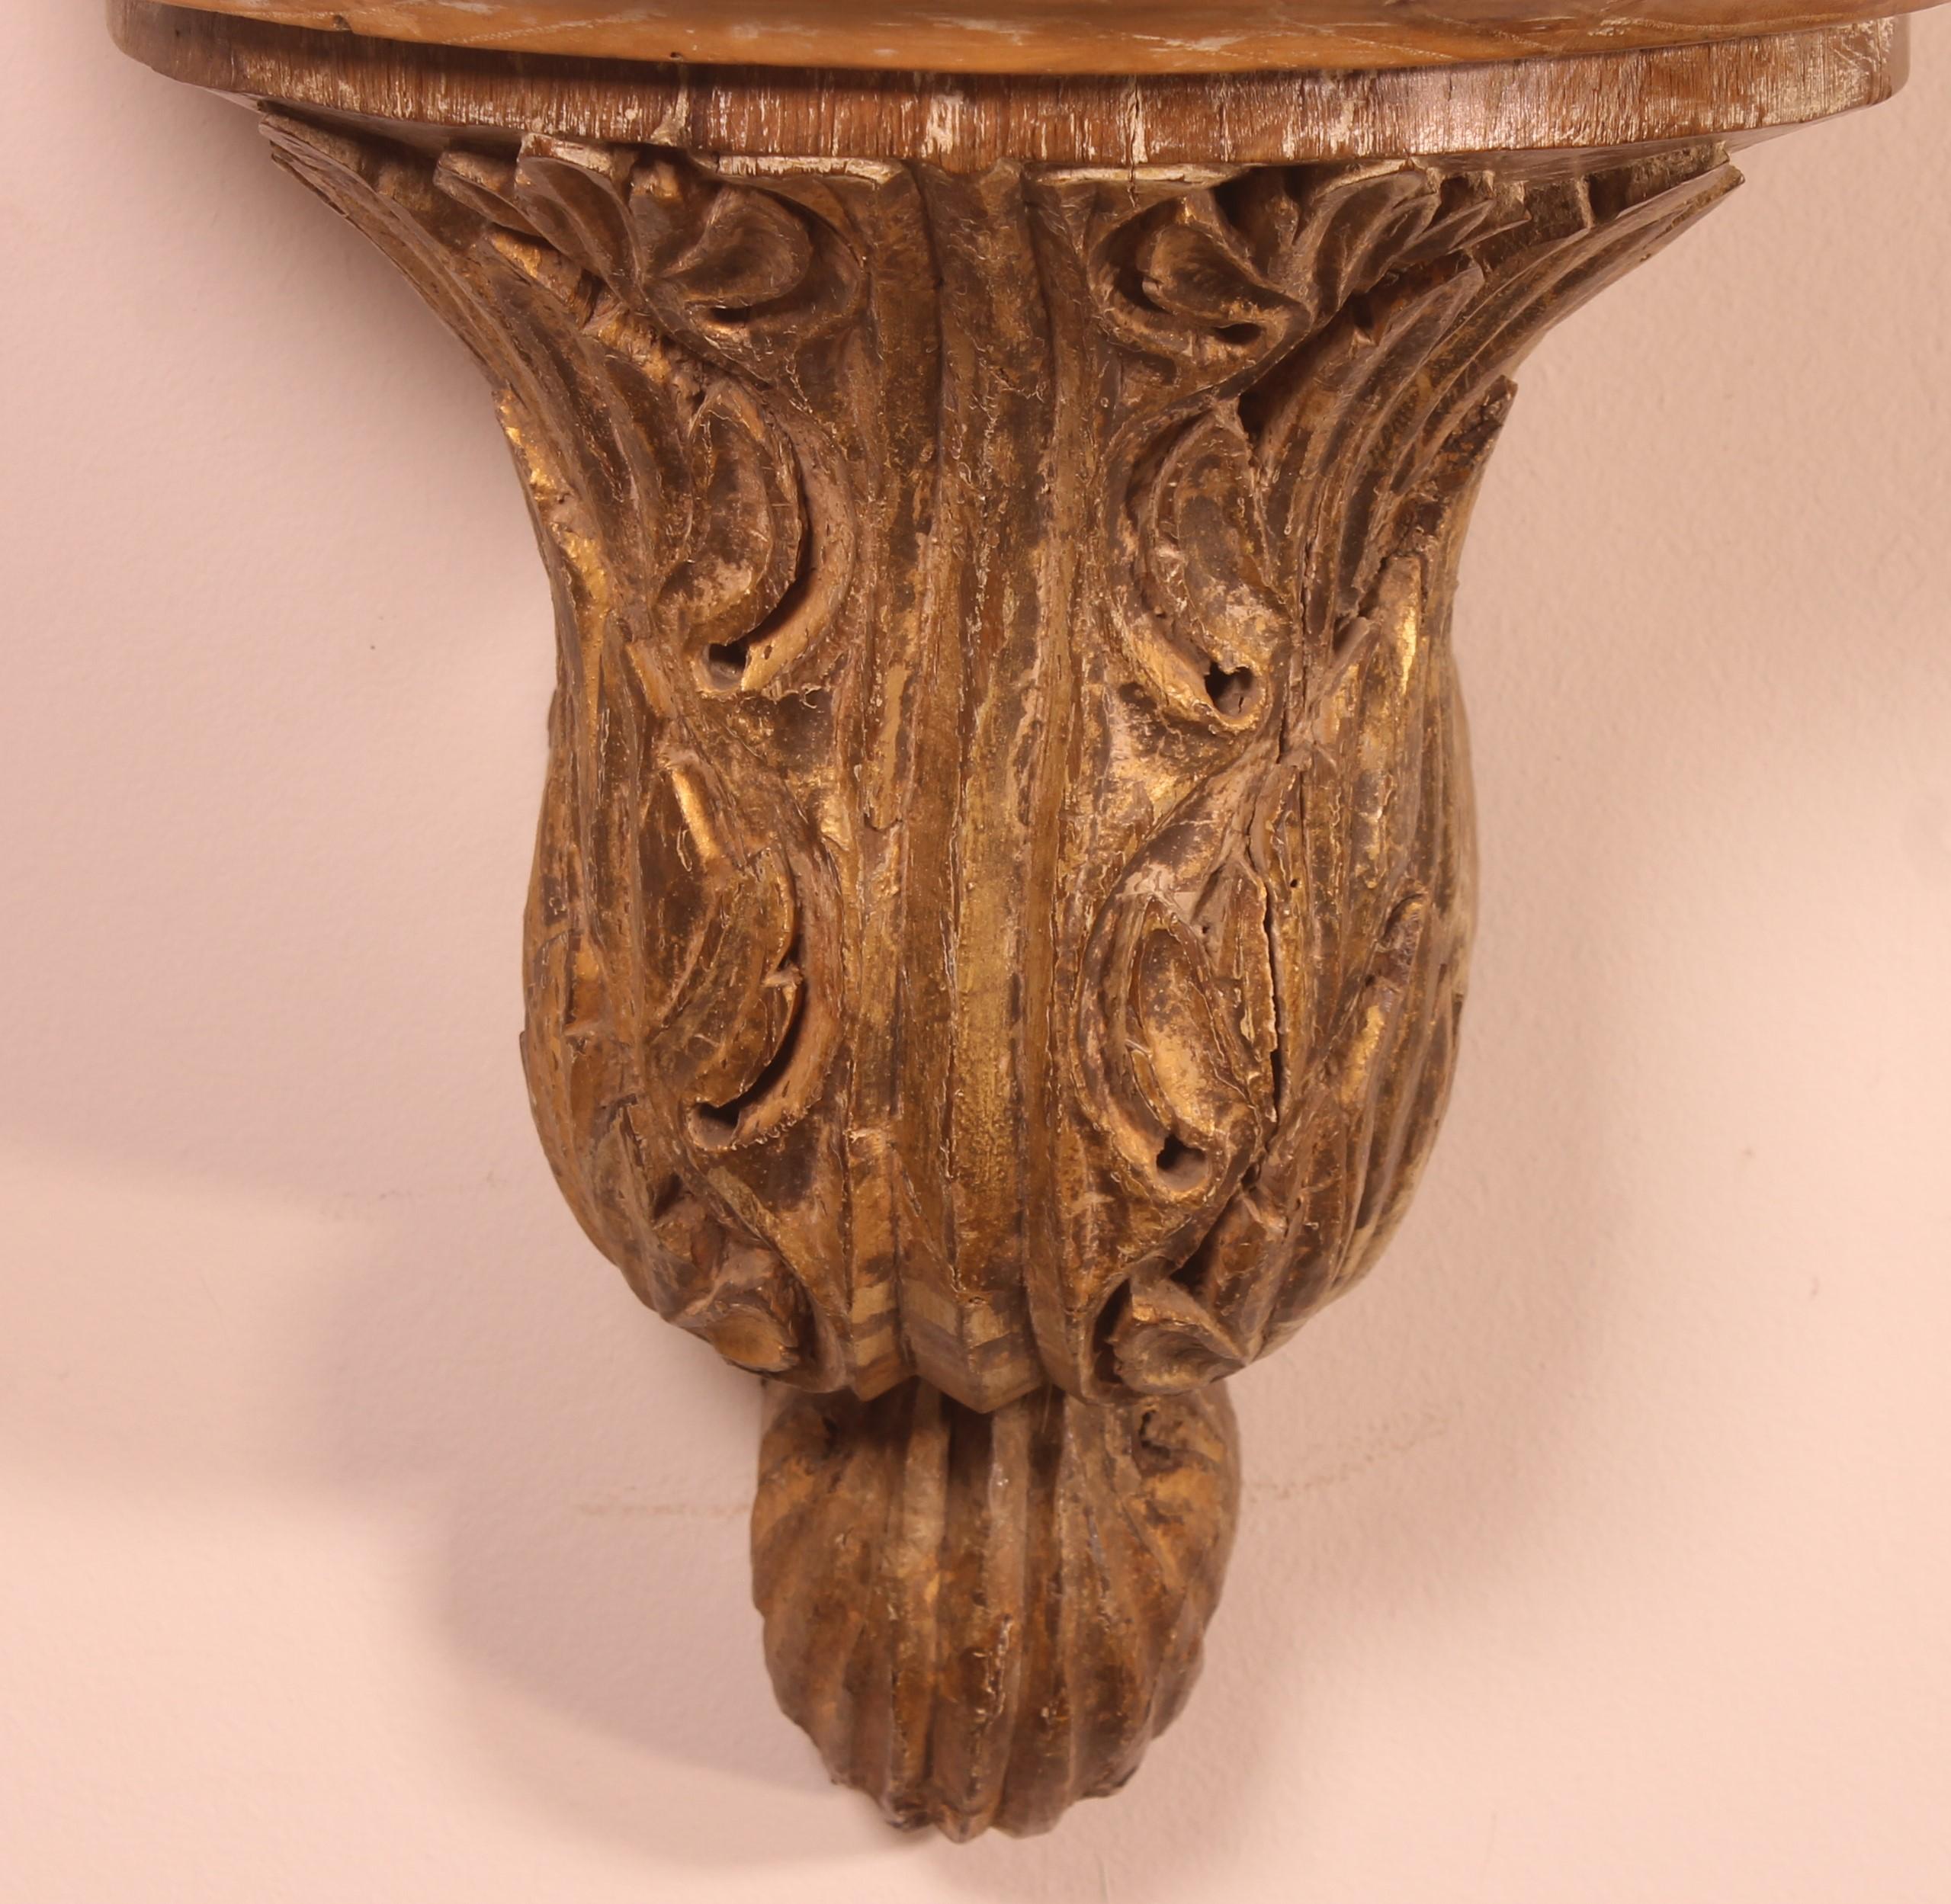 Elegant carved wall console in wood with acanthus leaf decoration from the 18th century
Very beautiful patina and in very good condition
Note: the upper part has been redone with a faux marble decoration